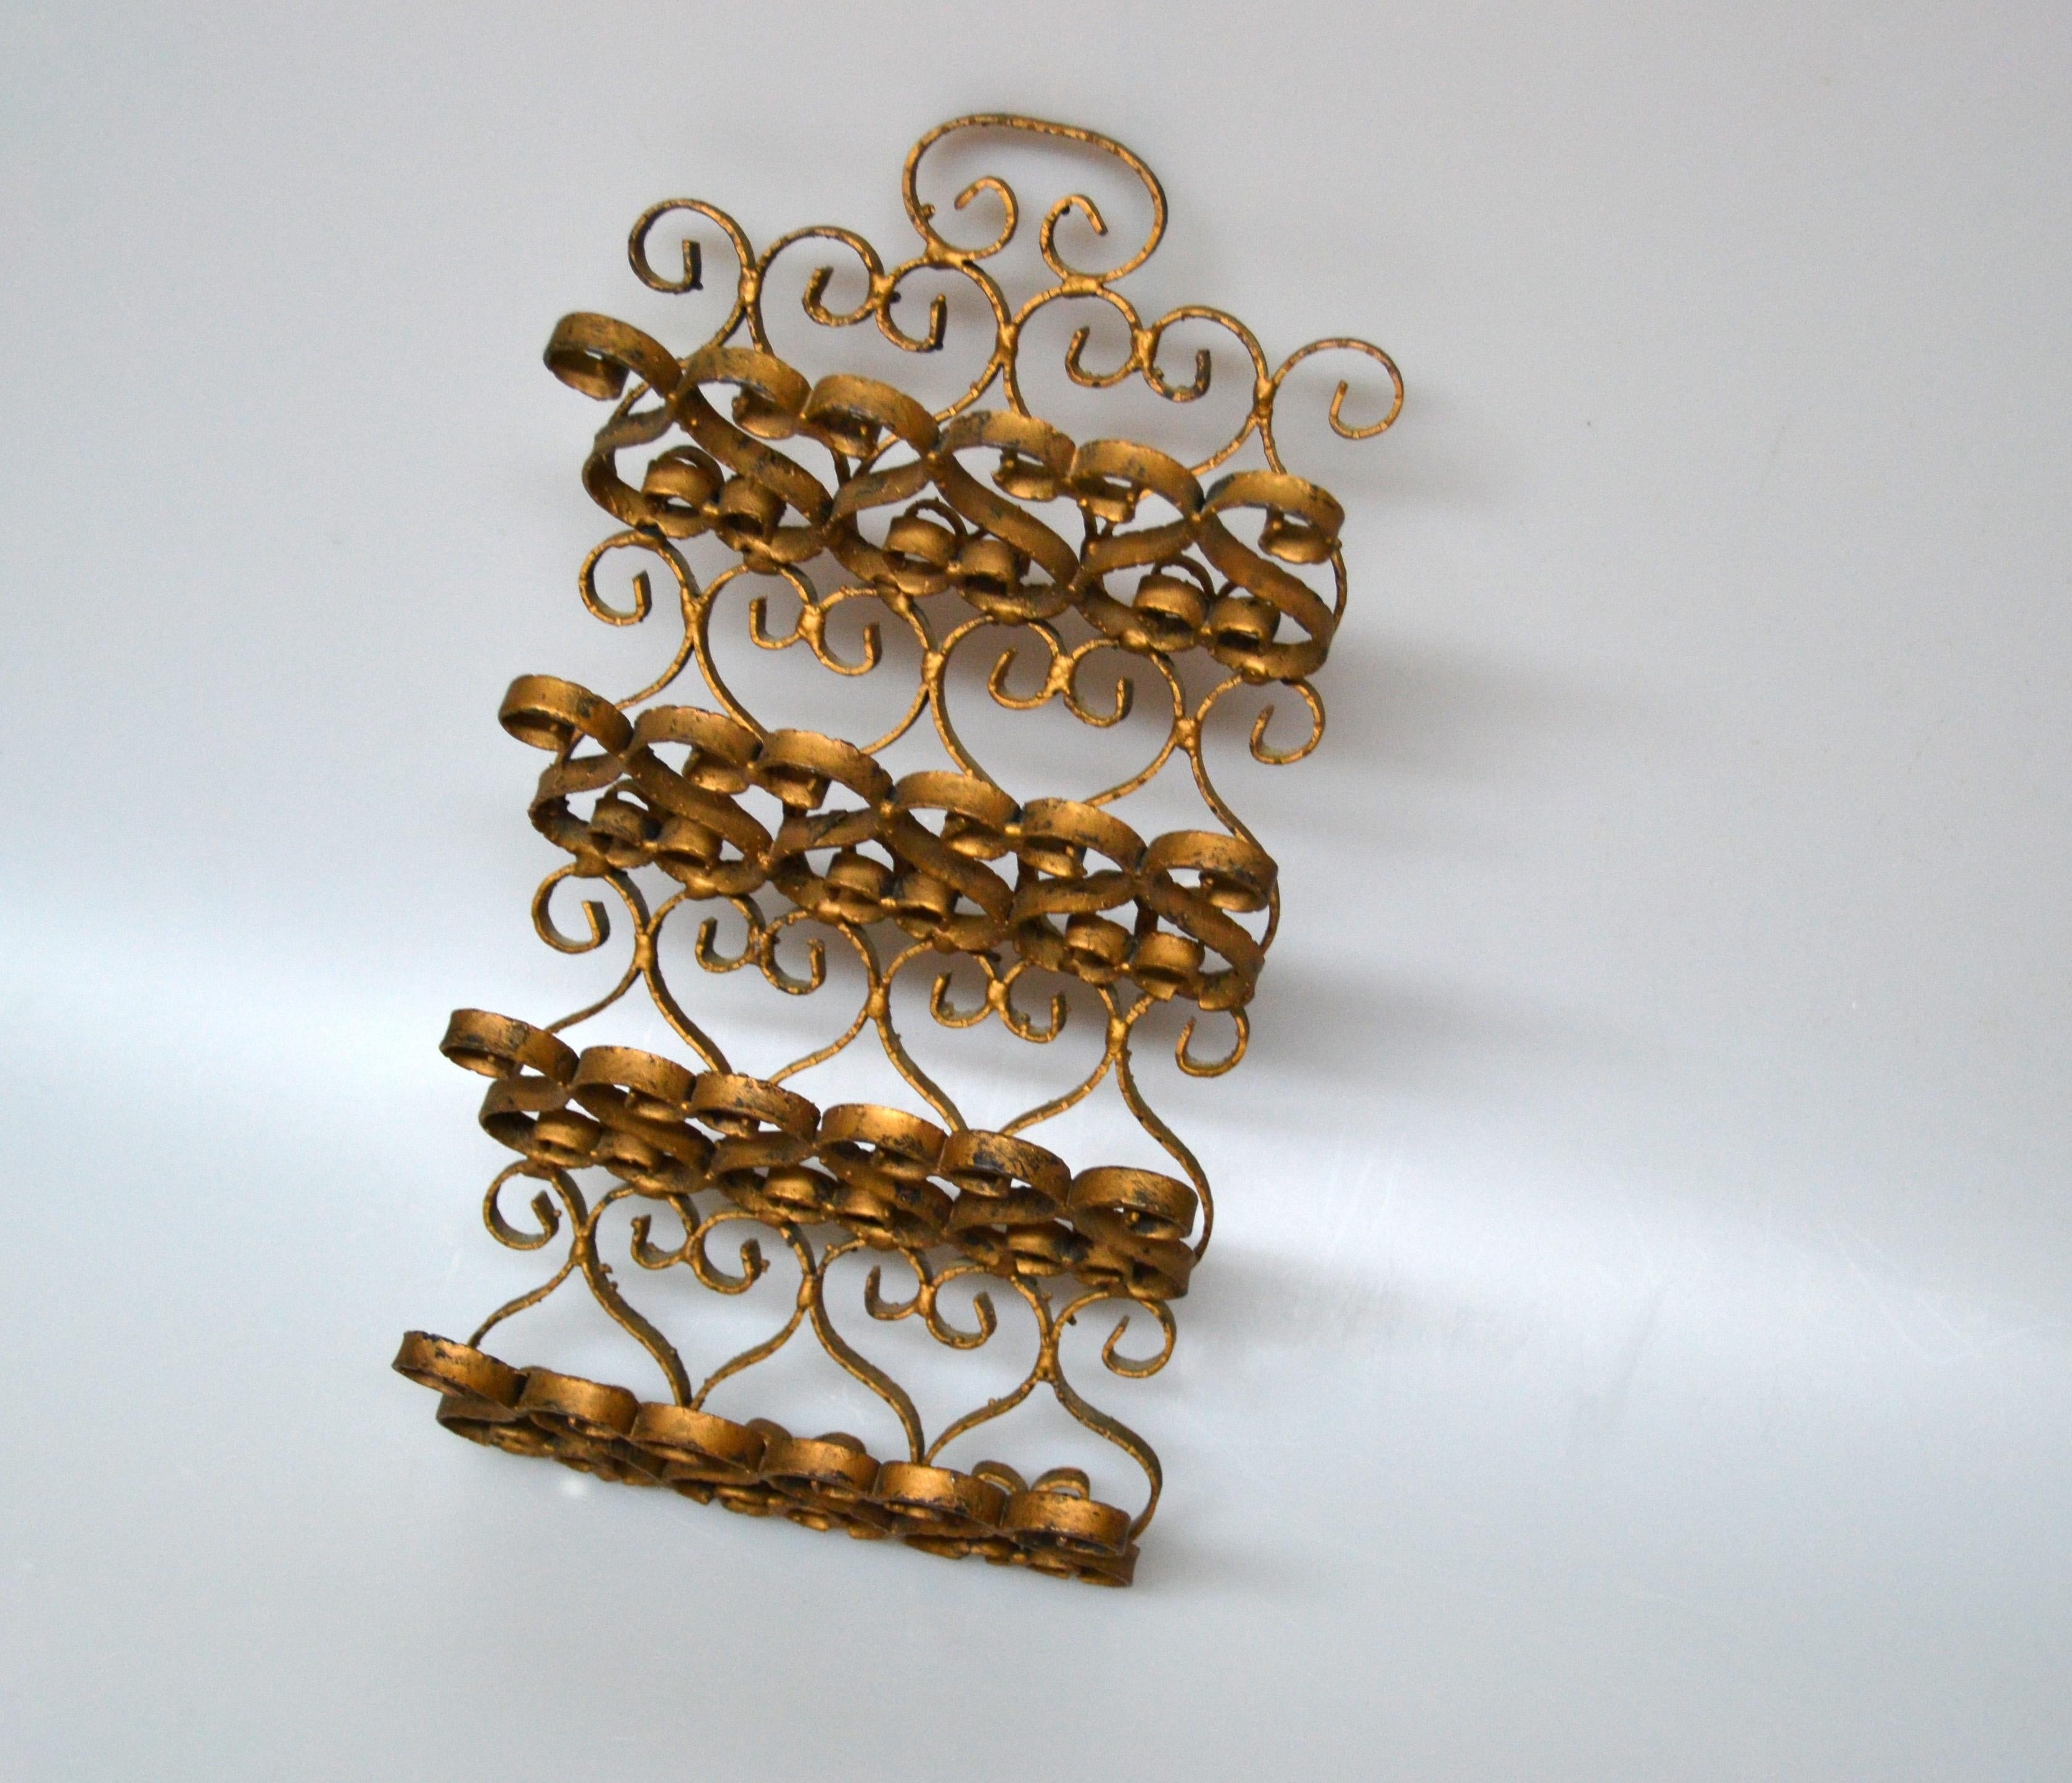 20th Century Art Nouveau Whimsical Handcrafted Golden Wrought Iron Letter, Recipe Organizer